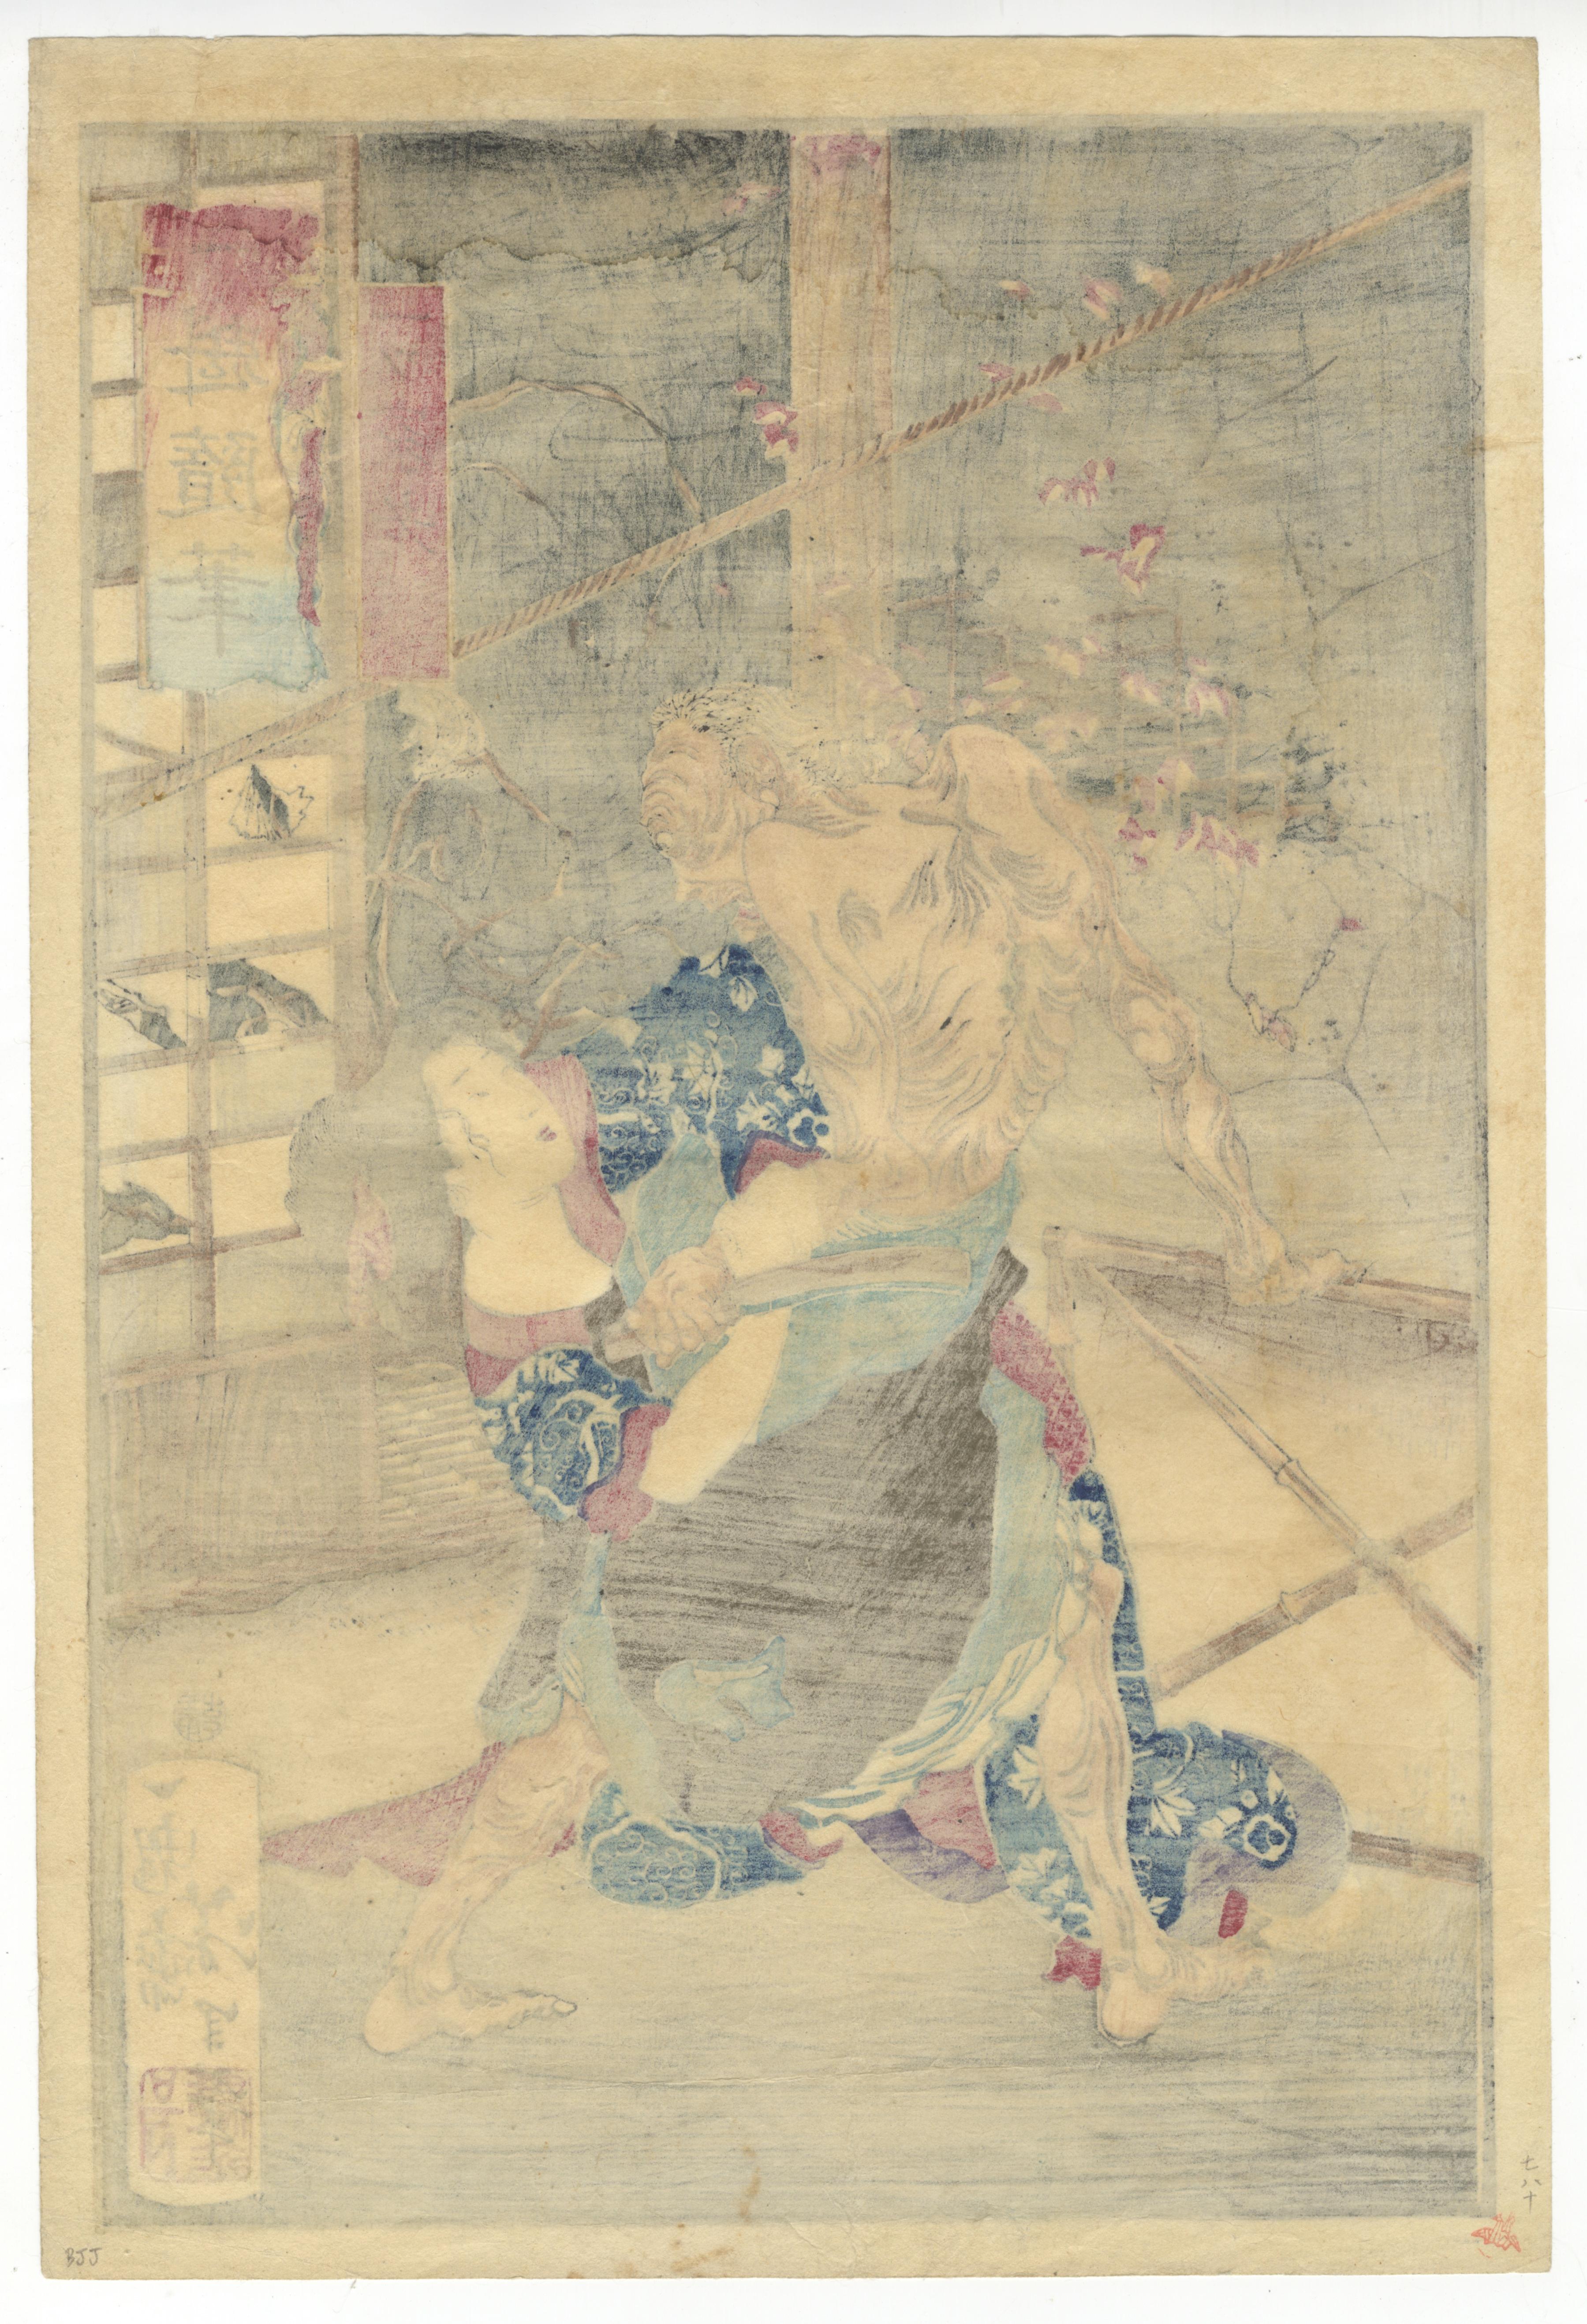 Artist: Yoshitoshi Tsukioka (1839-1892)
Title: The Old Hag of the Lonely House. 
Date: 1872
Dimensions: 36.8 x 24.9 cm

Yoshitoshi based his design on this story on an already existing design by his master, Utagawa Kuniyoshi (1798 - 1861). His